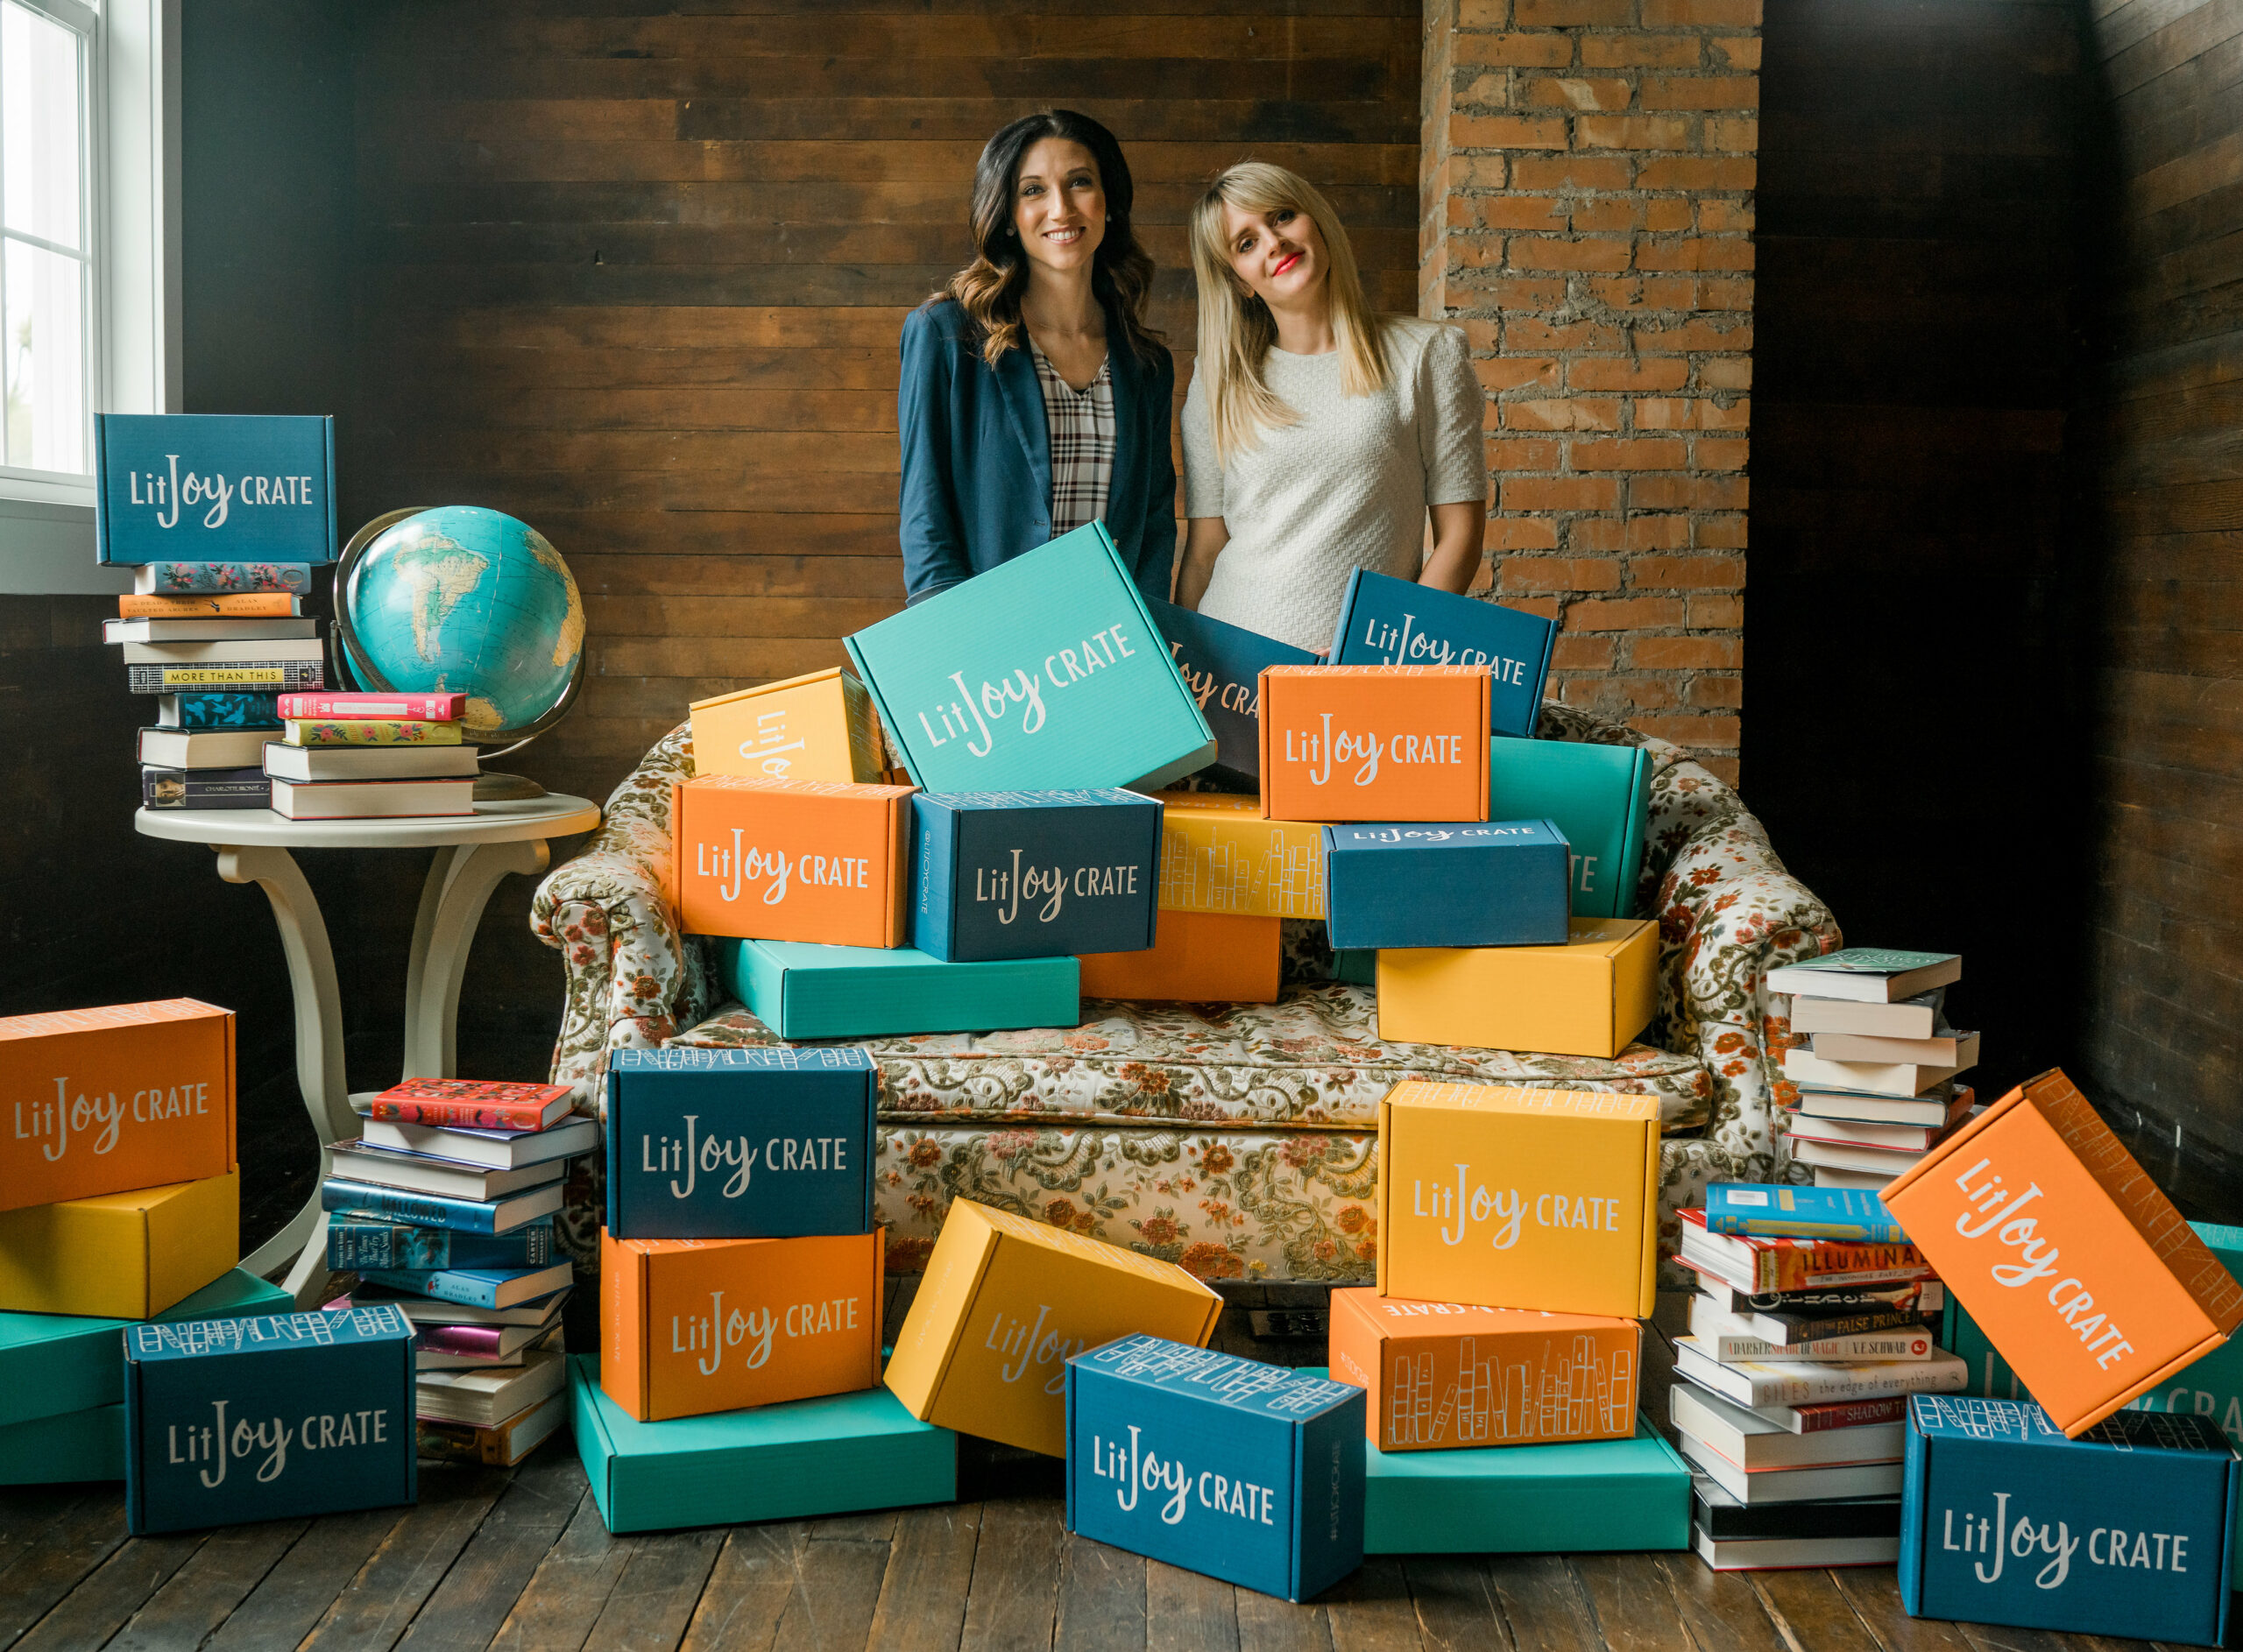 How Alix Lewis Burrows co-founded LitJoy Crate